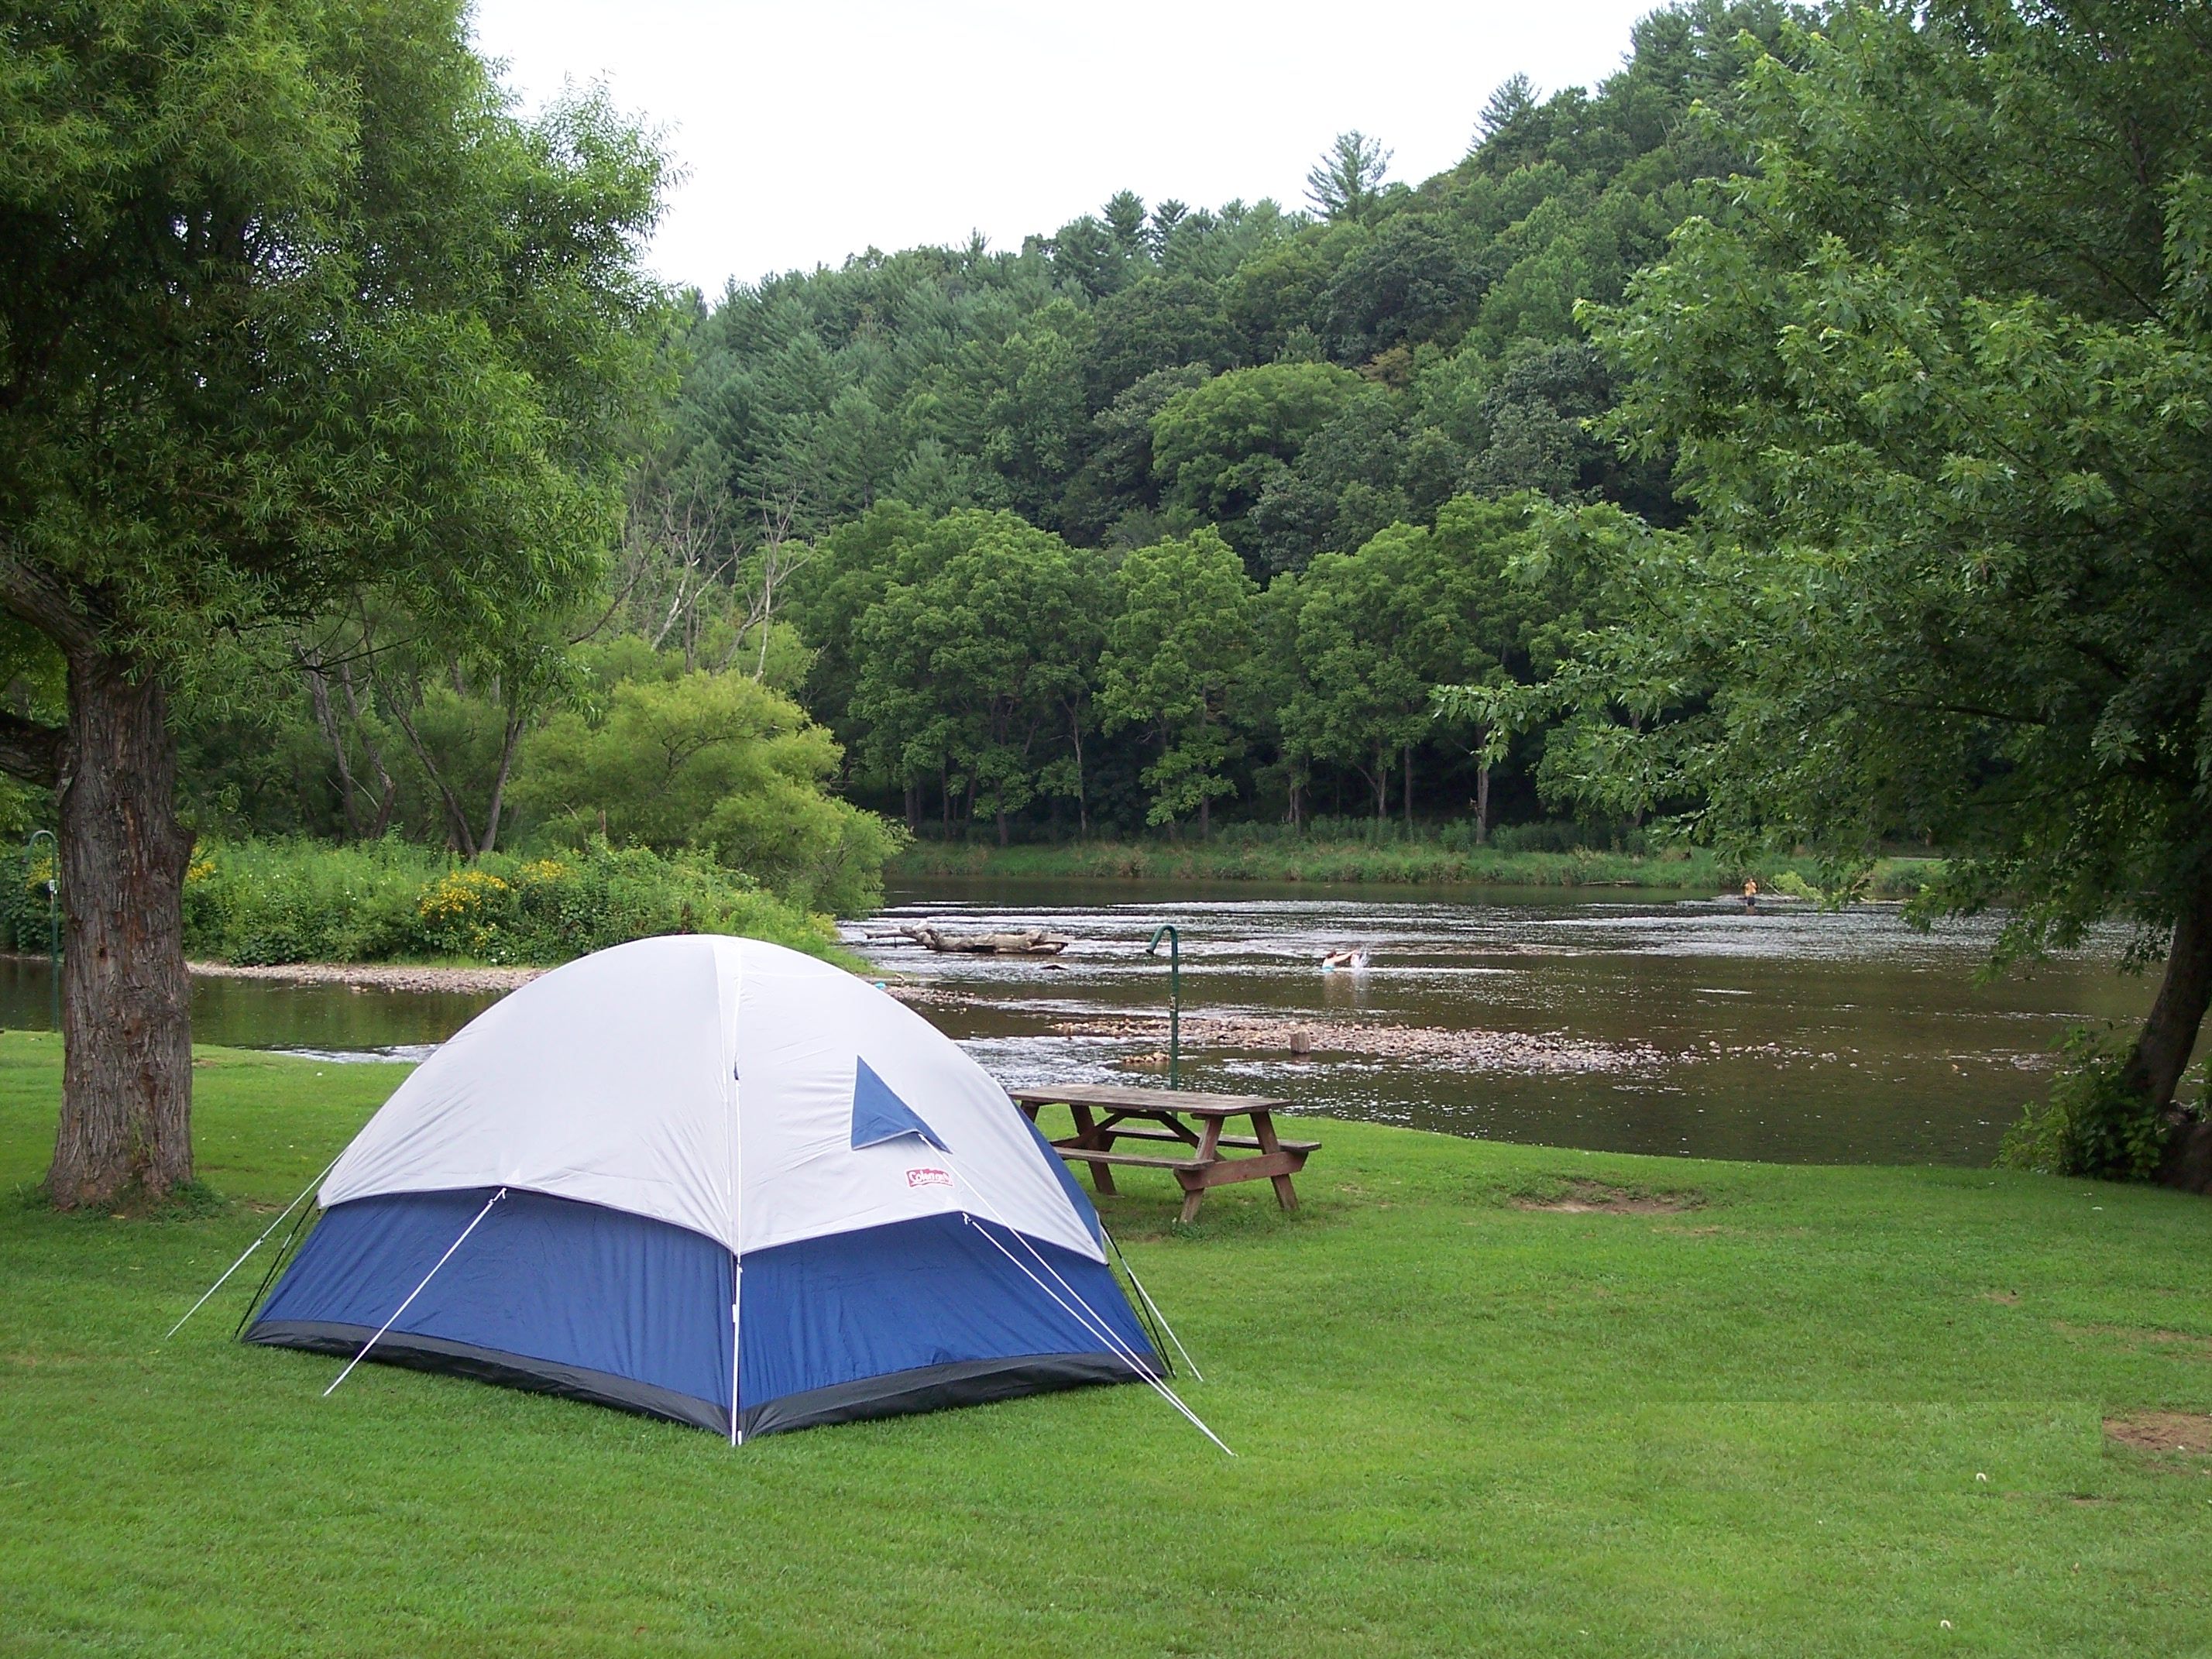 Tent Site with river view | Camping Adventures | Pinterest | Fish ...